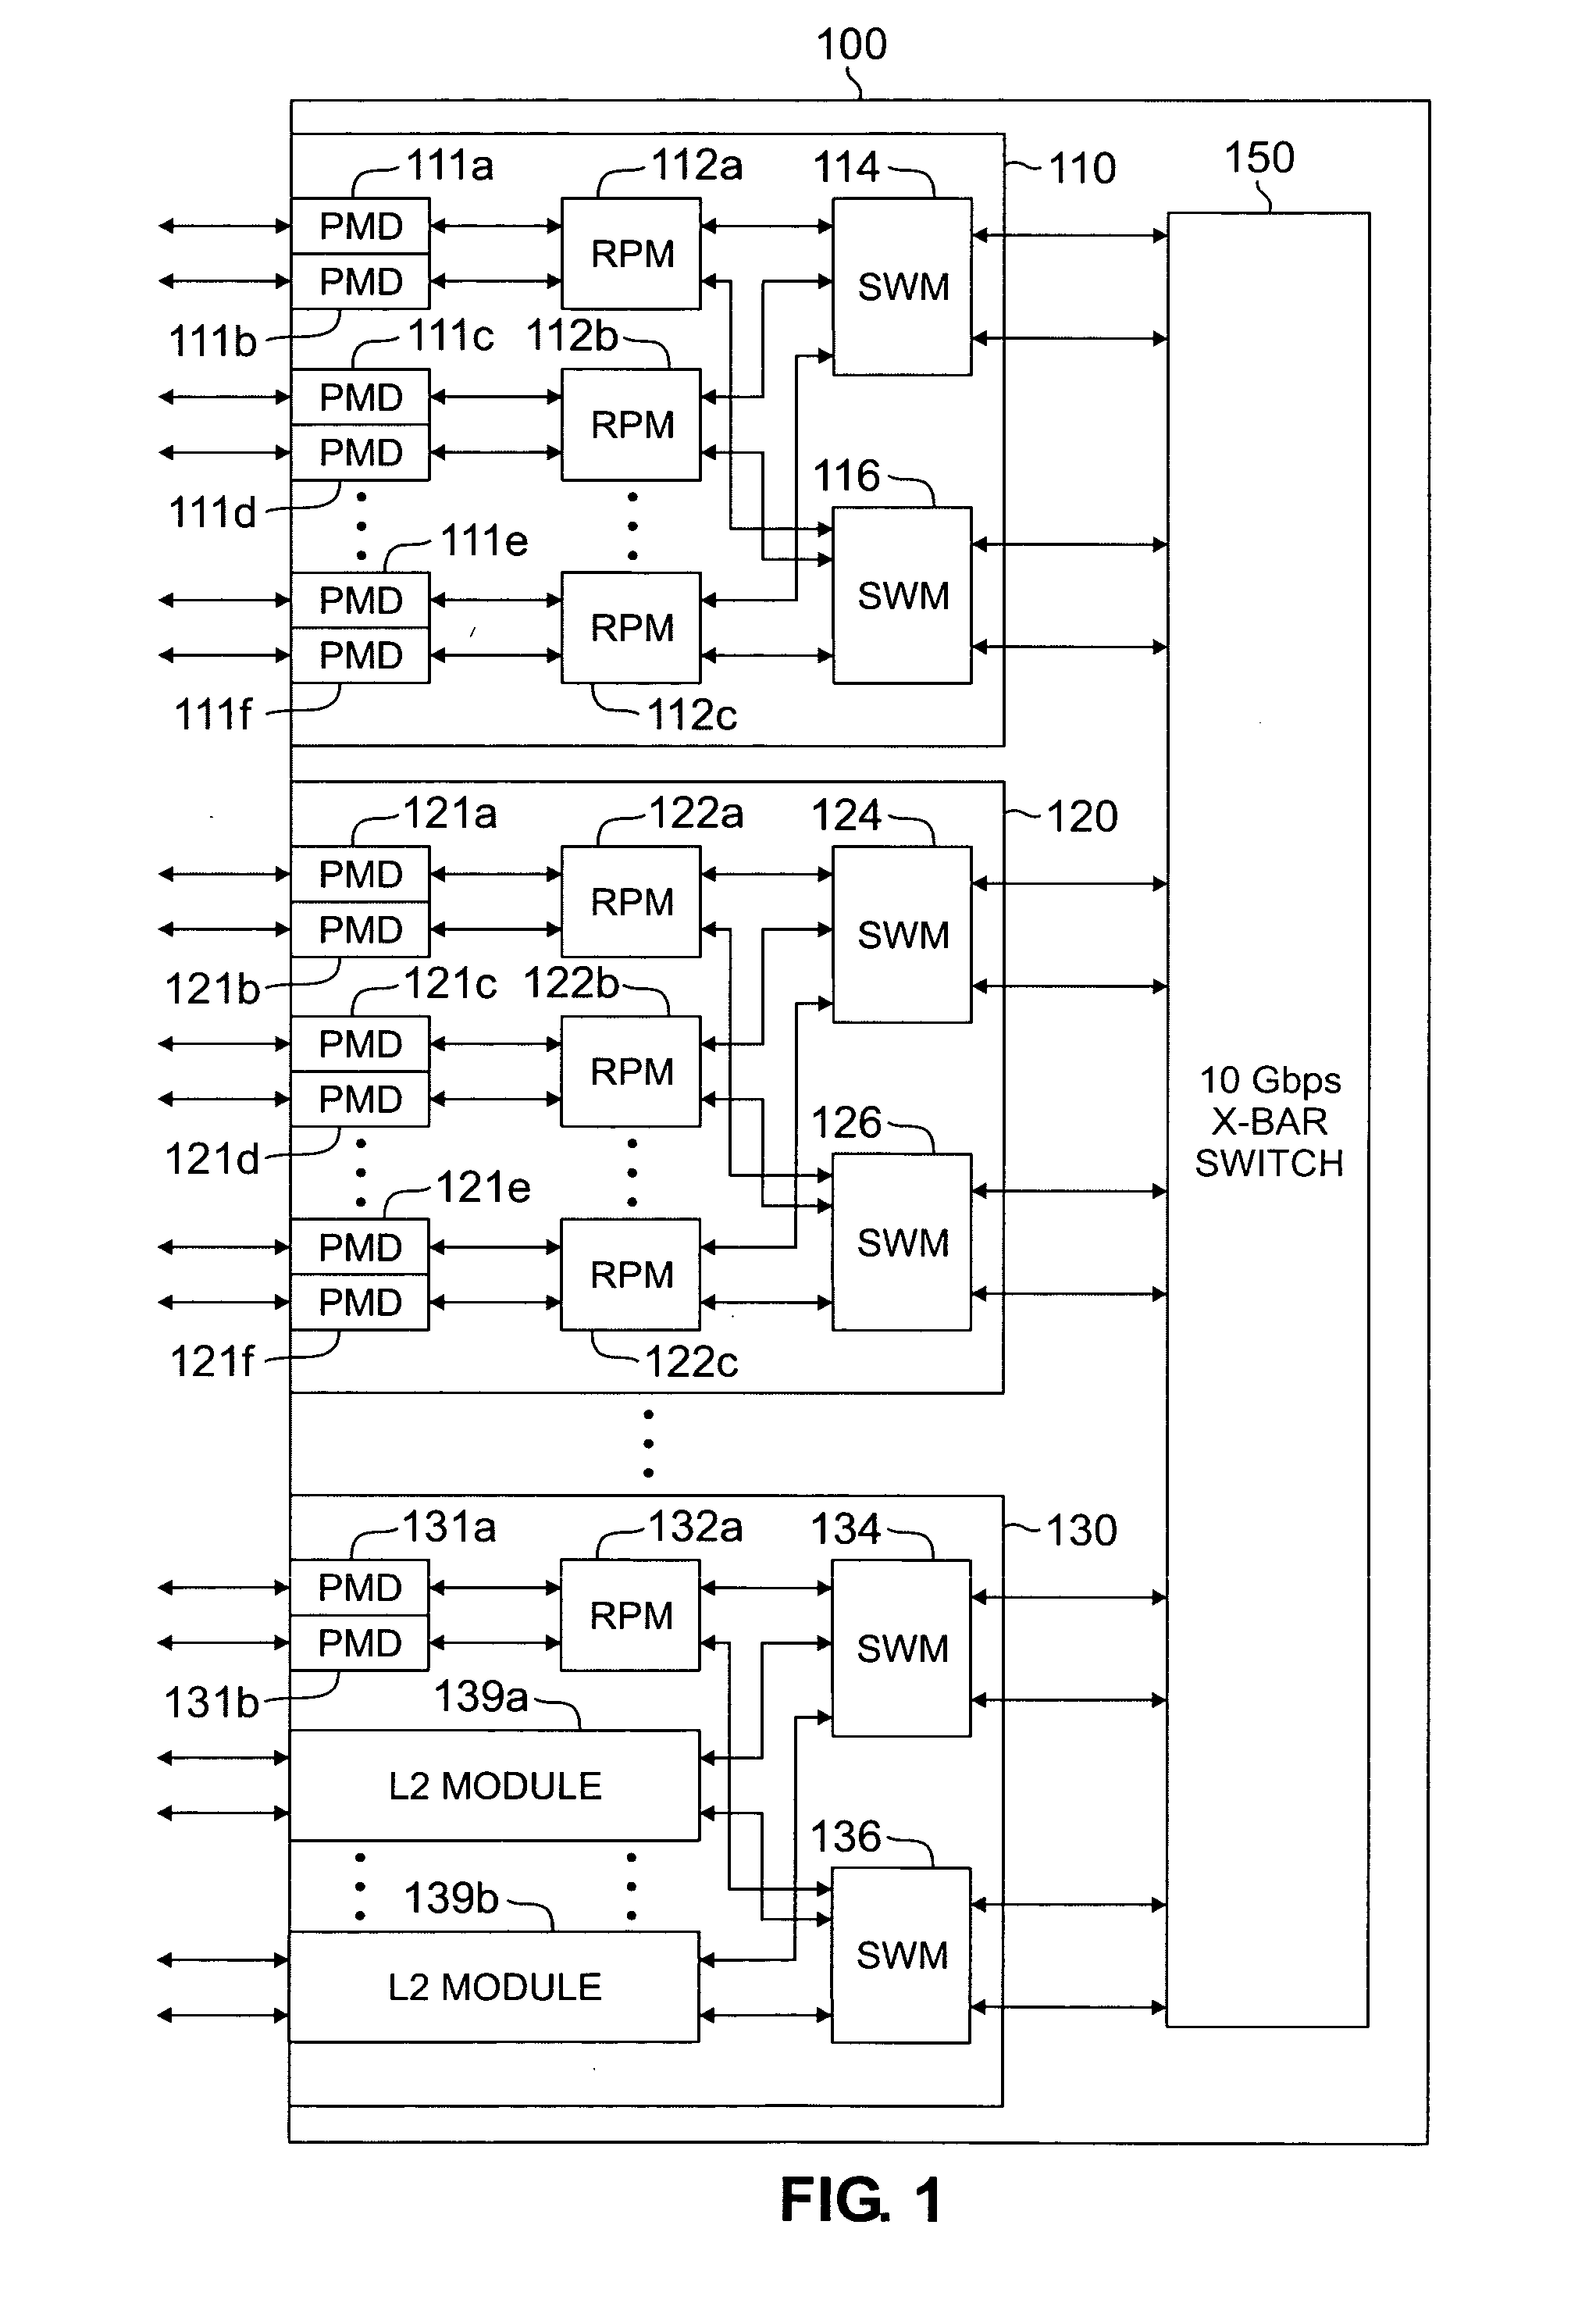 Apparatus and method for maintaining high-speed forwarding tables in a massively parallel router